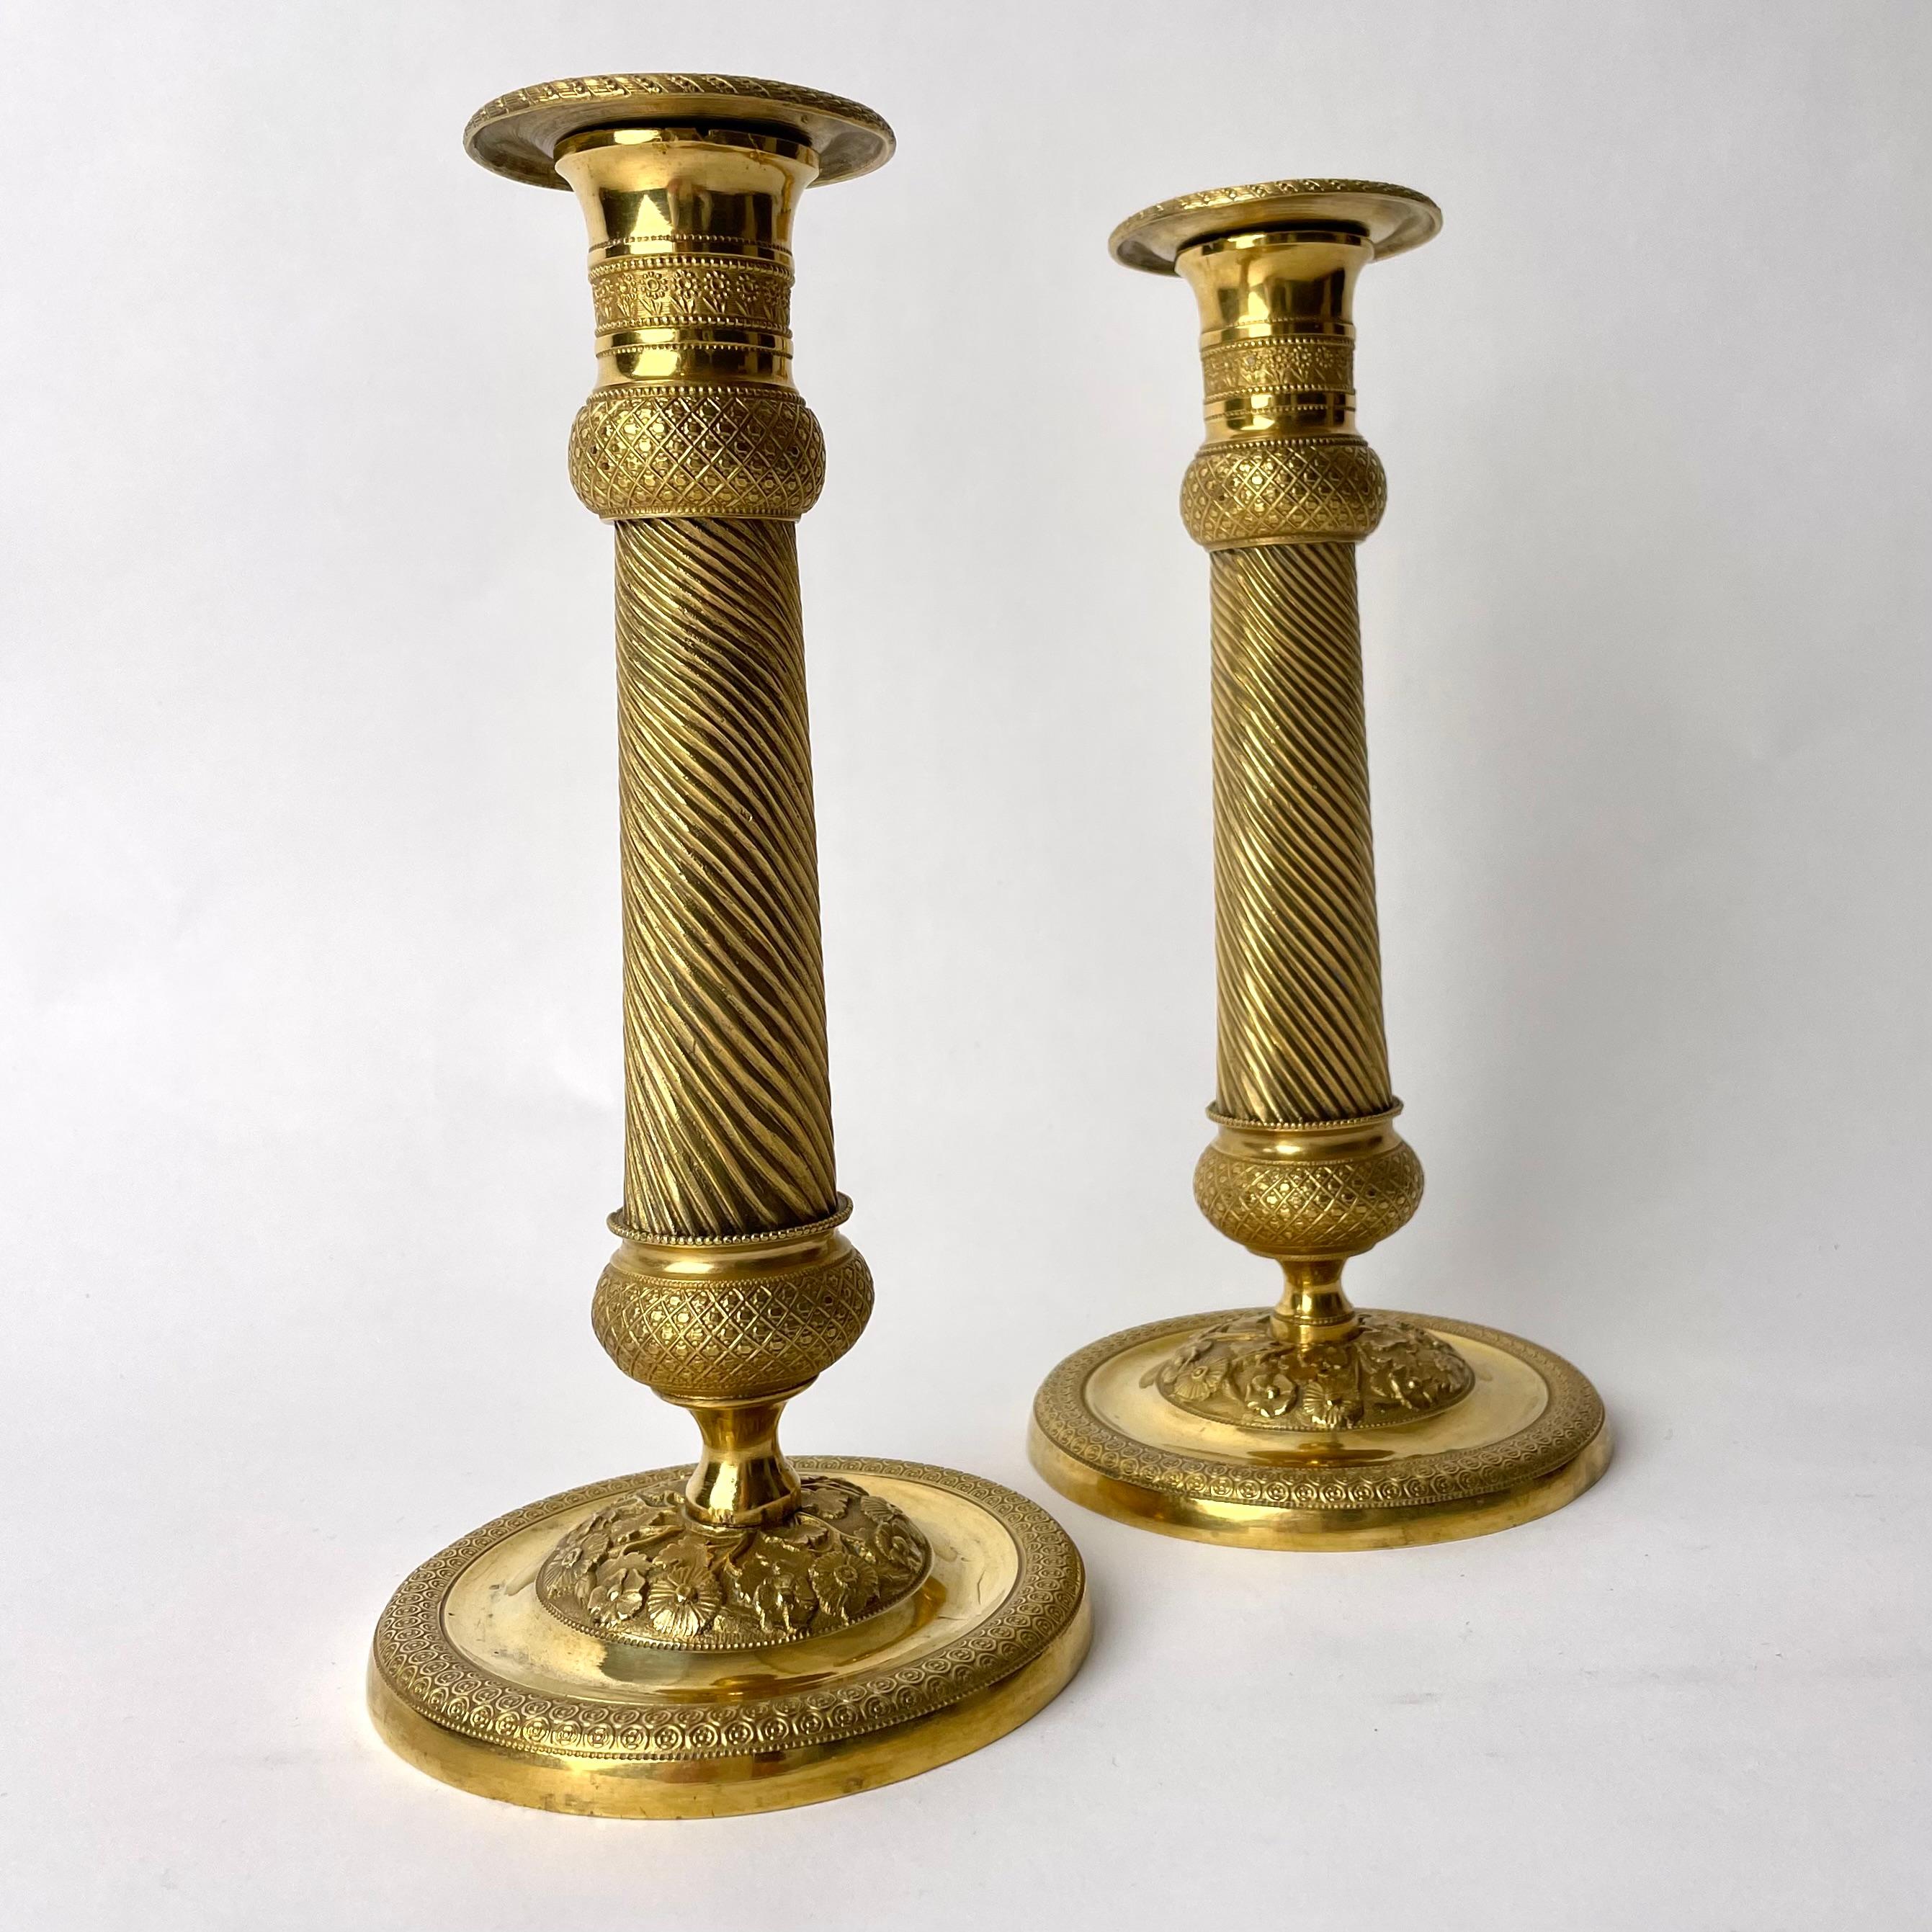 Pair of Gilded French Empire Candlesticks with charming decor from the 1820s In Good Condition For Sale In Knivsta, SE